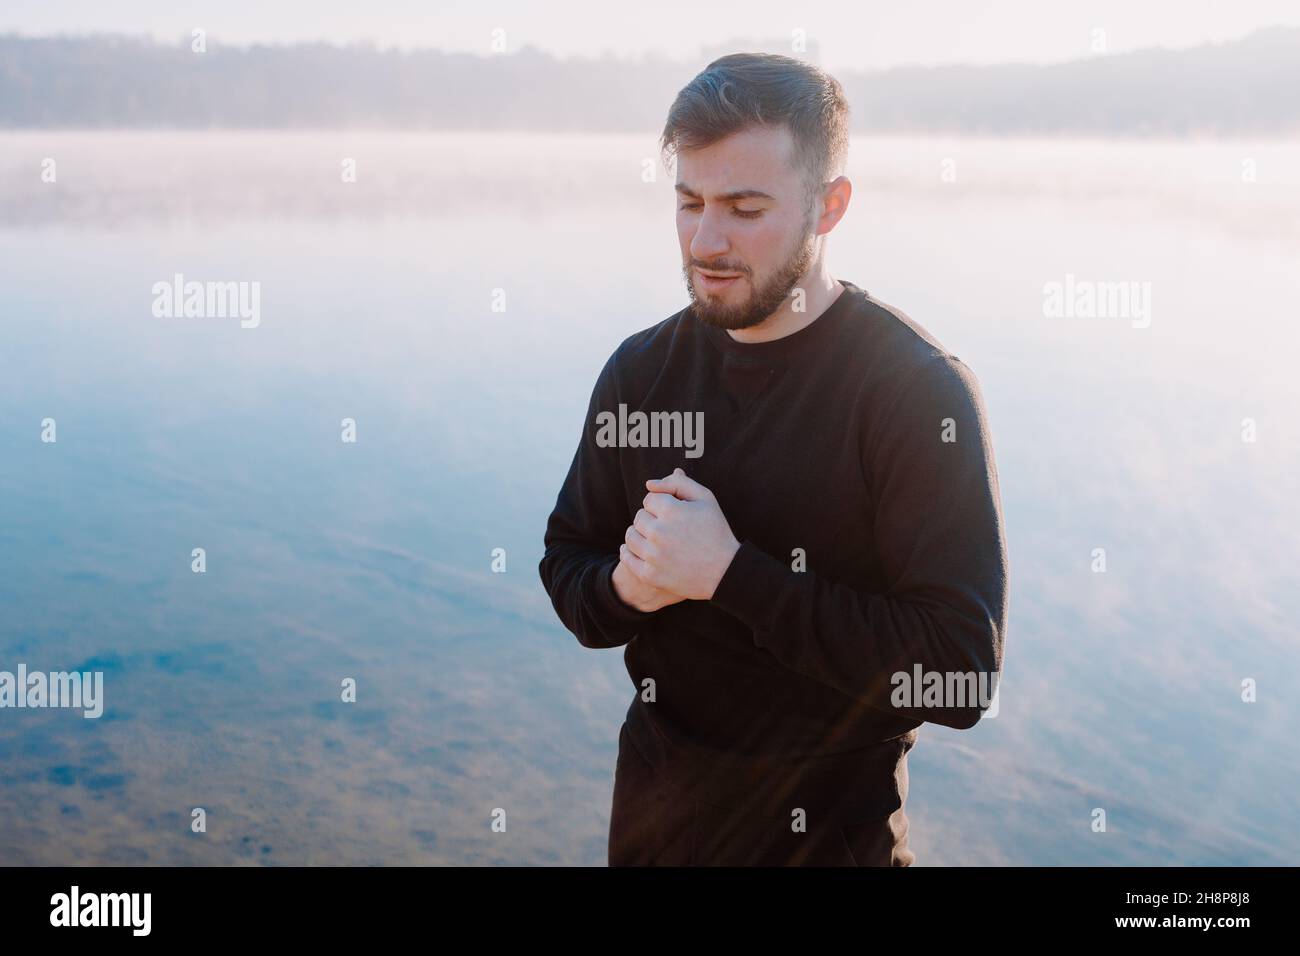 Man doing warmup and preparing for morning routine Stock Photo